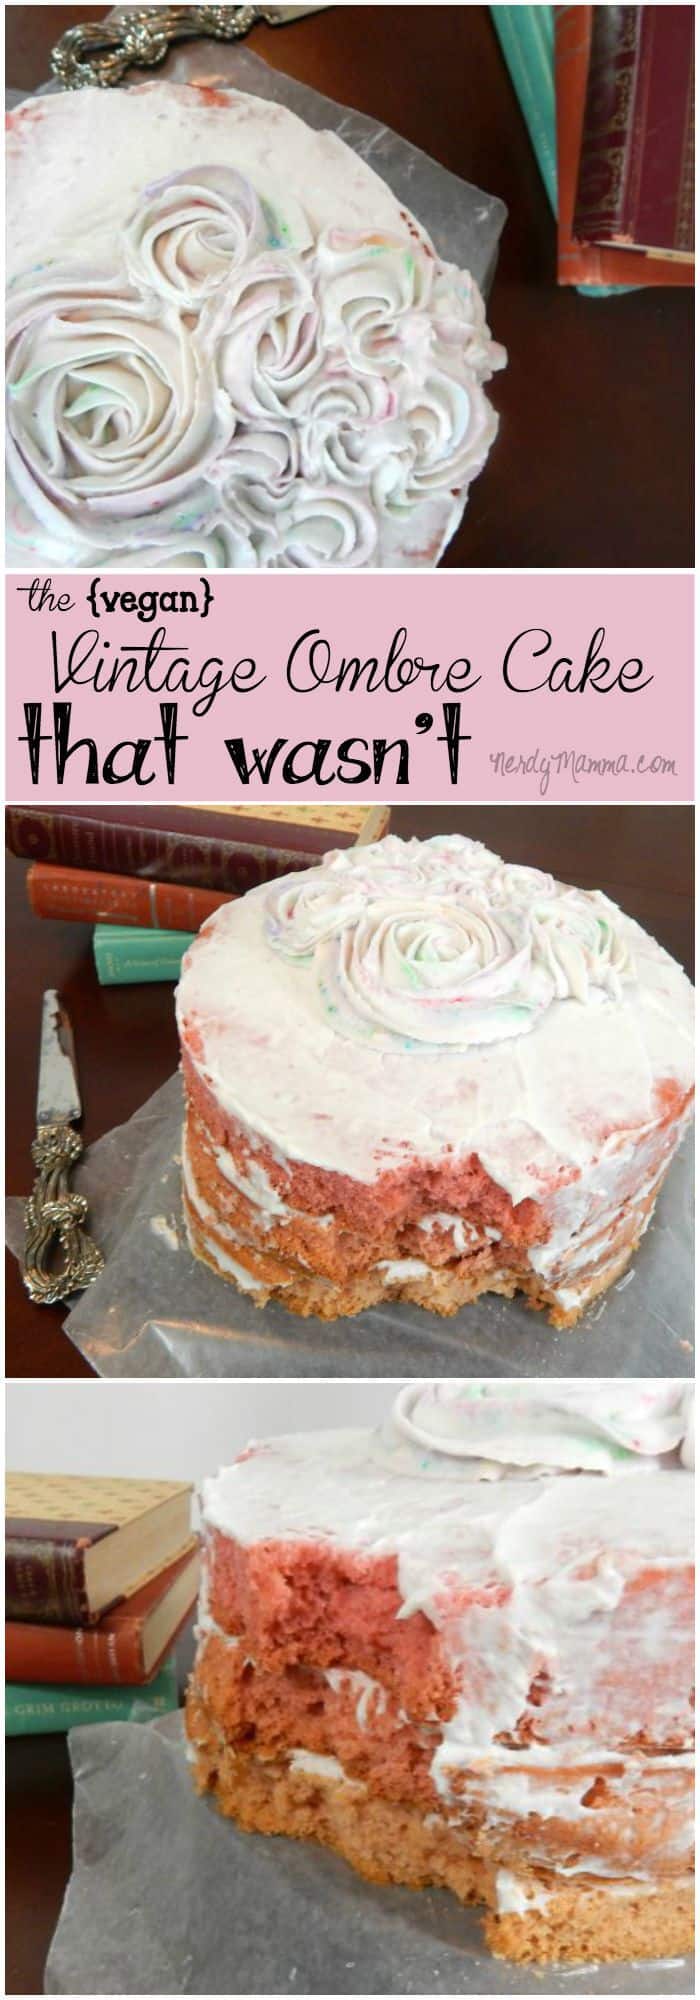 My son ruined my layer cake. I was not impressed. It was the cake for my daughter's birthday--a vintage ombre cake without eggs or dairy. I almost cried (ok, I did).